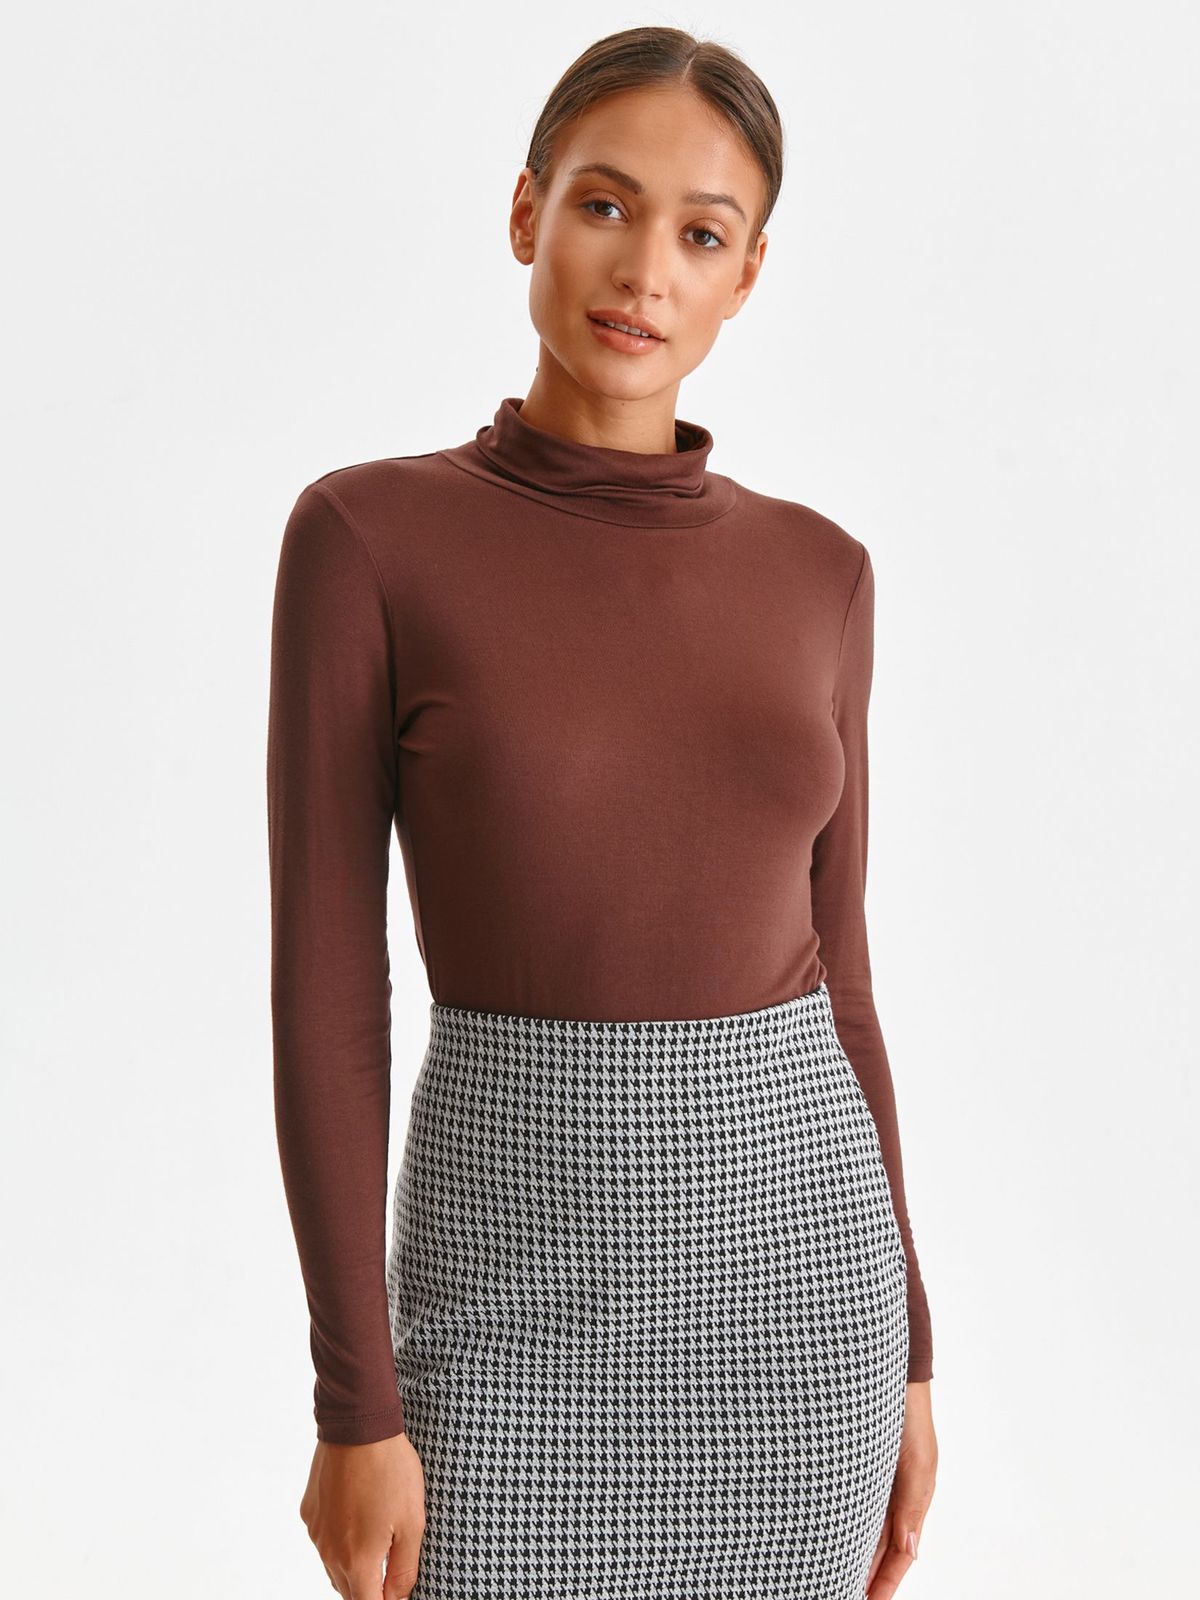 Brown sweater turtleneck from elastic fabric